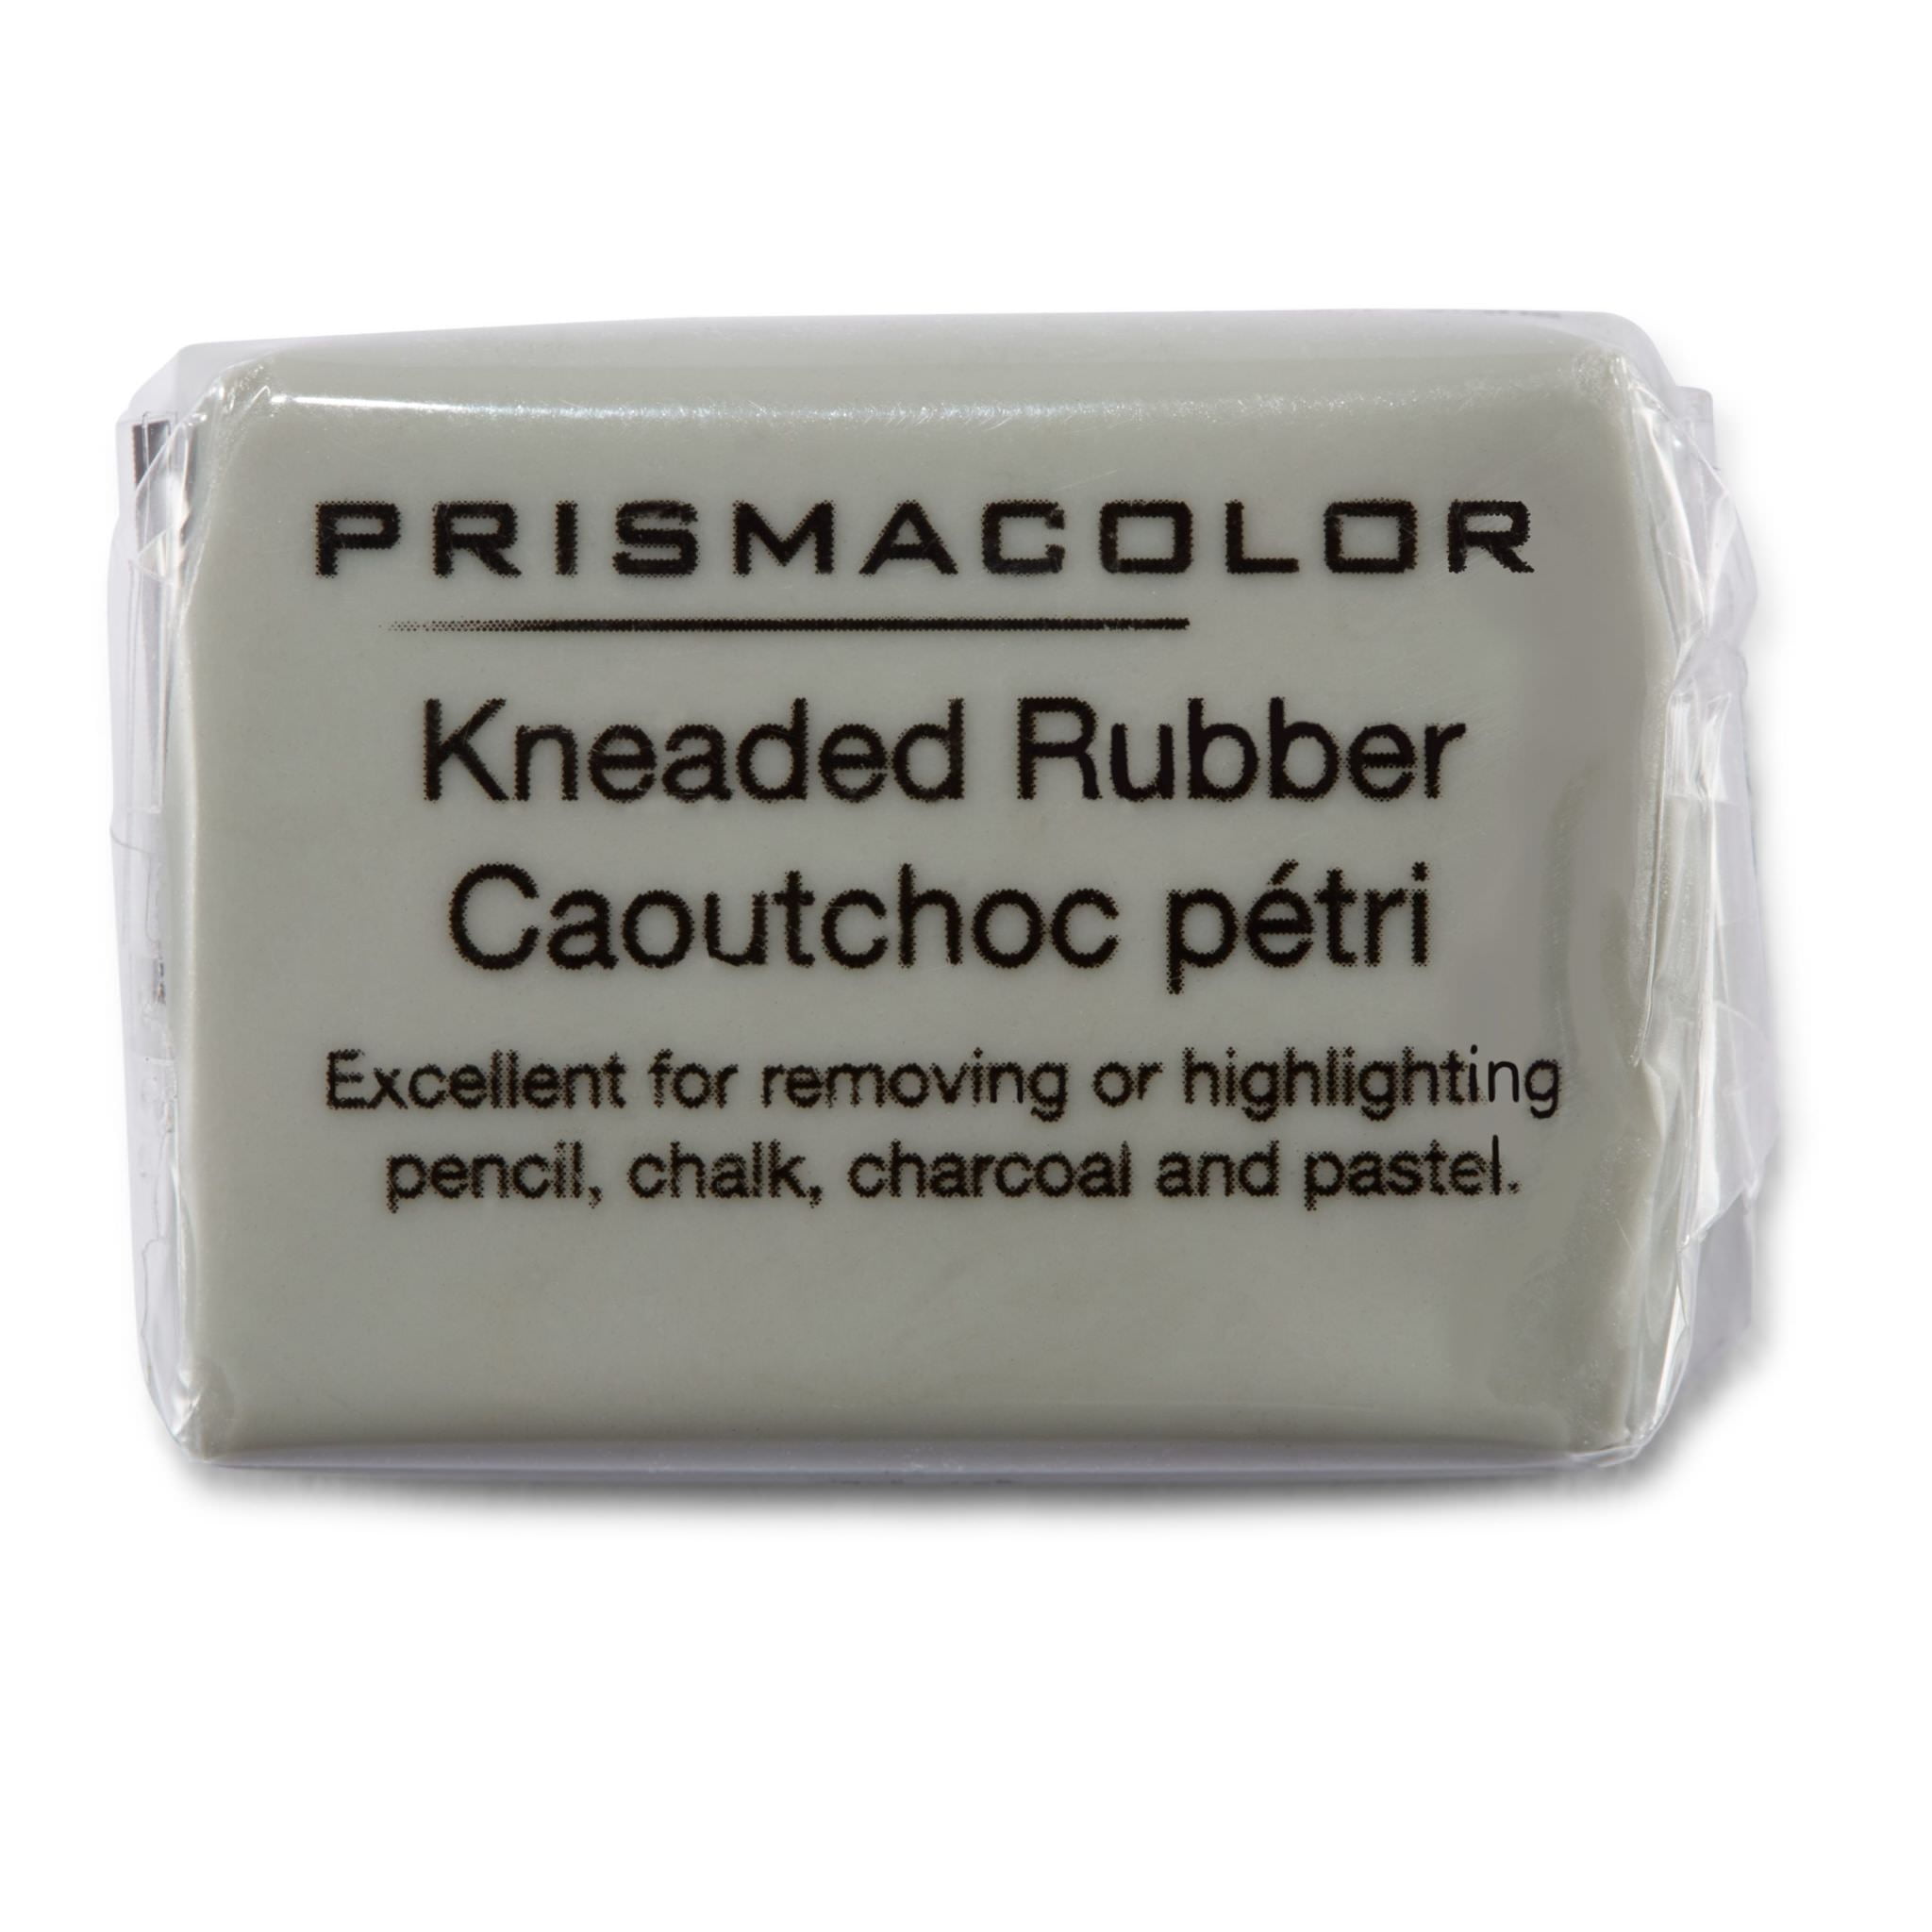 The Eraser You Didn't Know You Kneaded